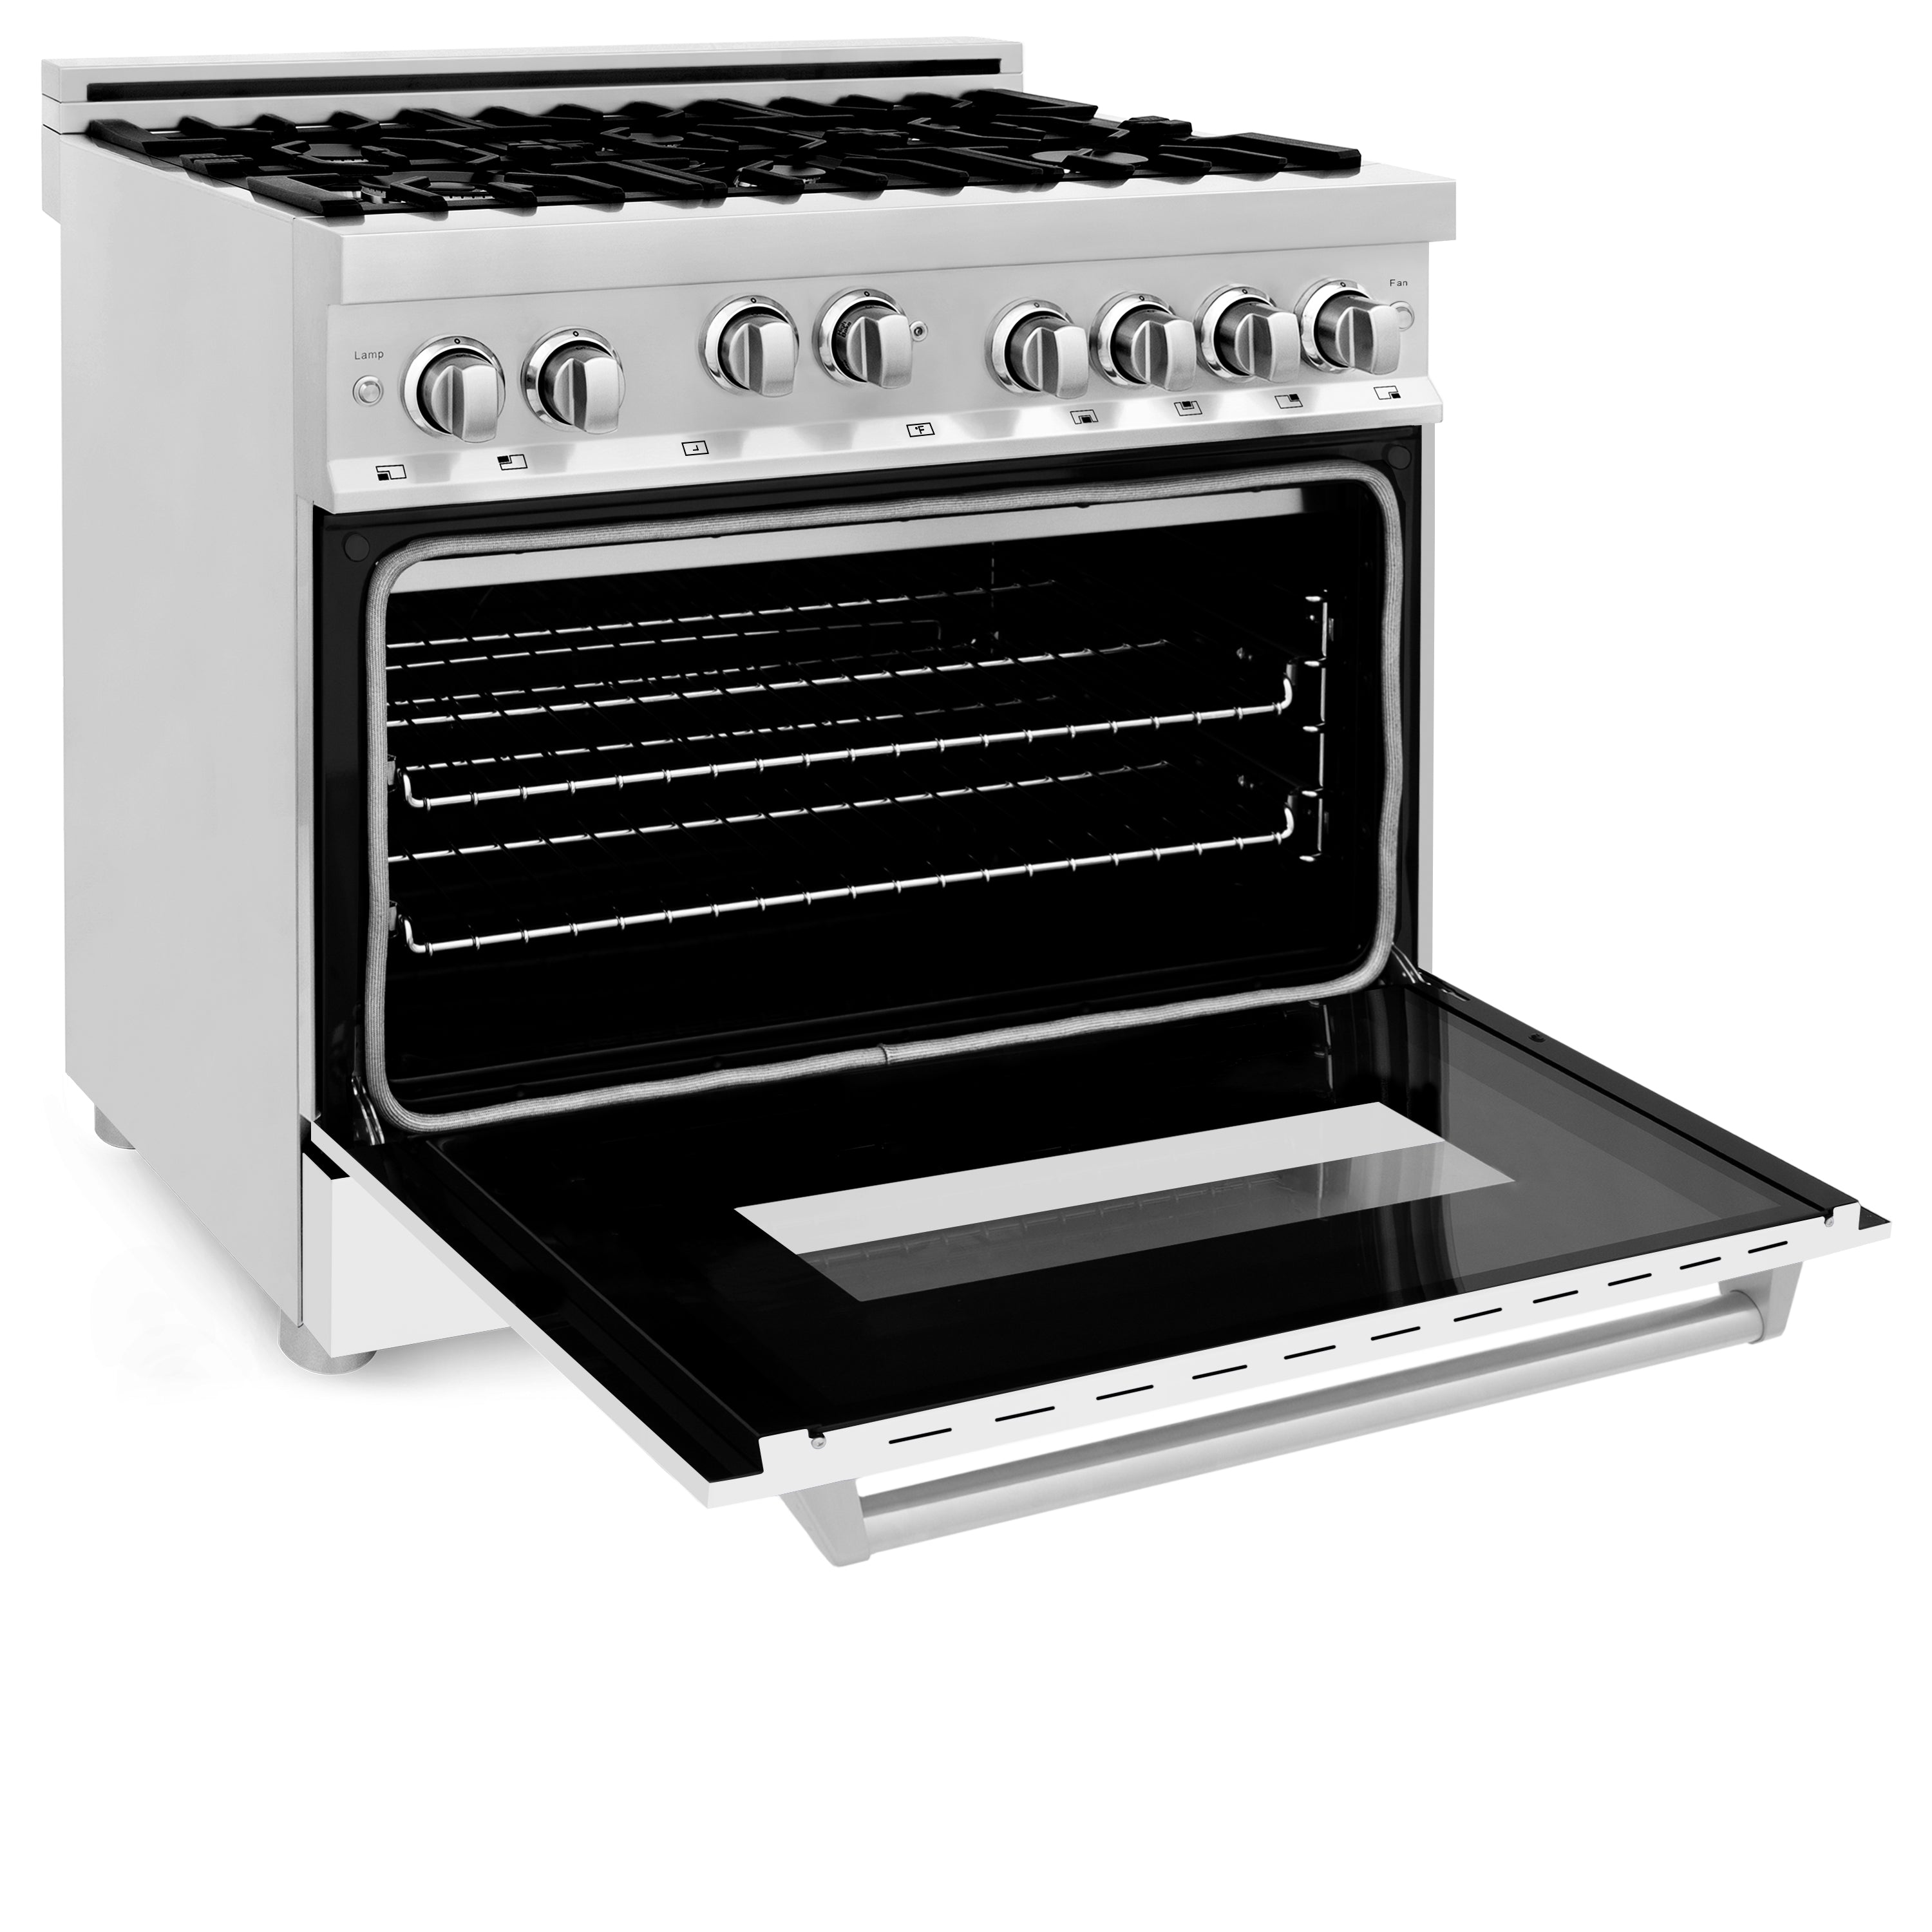 ZLINE 36 in. Professional 4.6 cu. ft. Gas on Gas Range in Stainless Steel with Color Door Options (RG36)